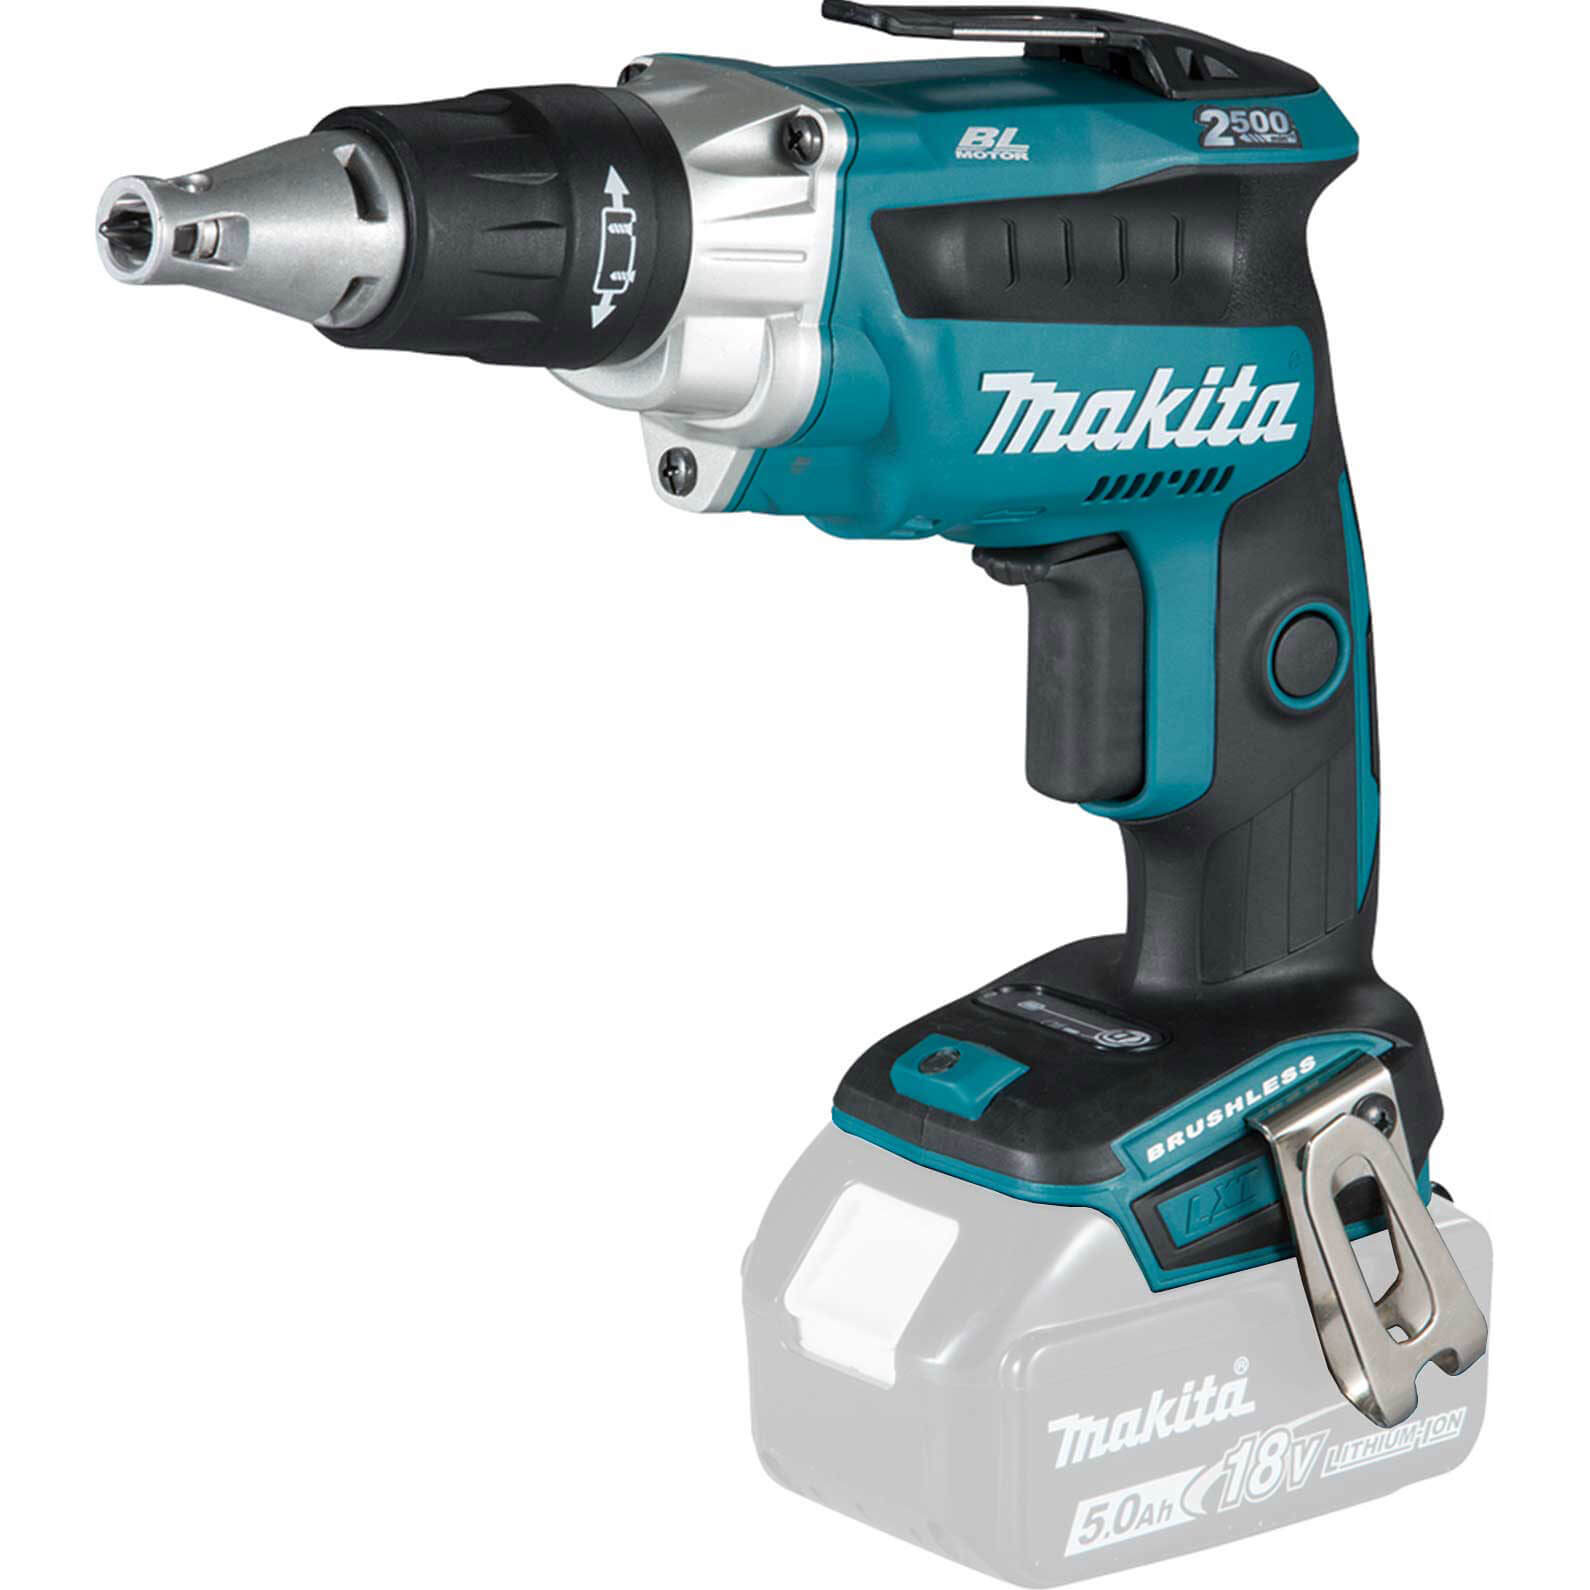 Makita DFS250 18v LXT Cordless Brushless Drywall Screwdriver No Batteries No Charger No Case